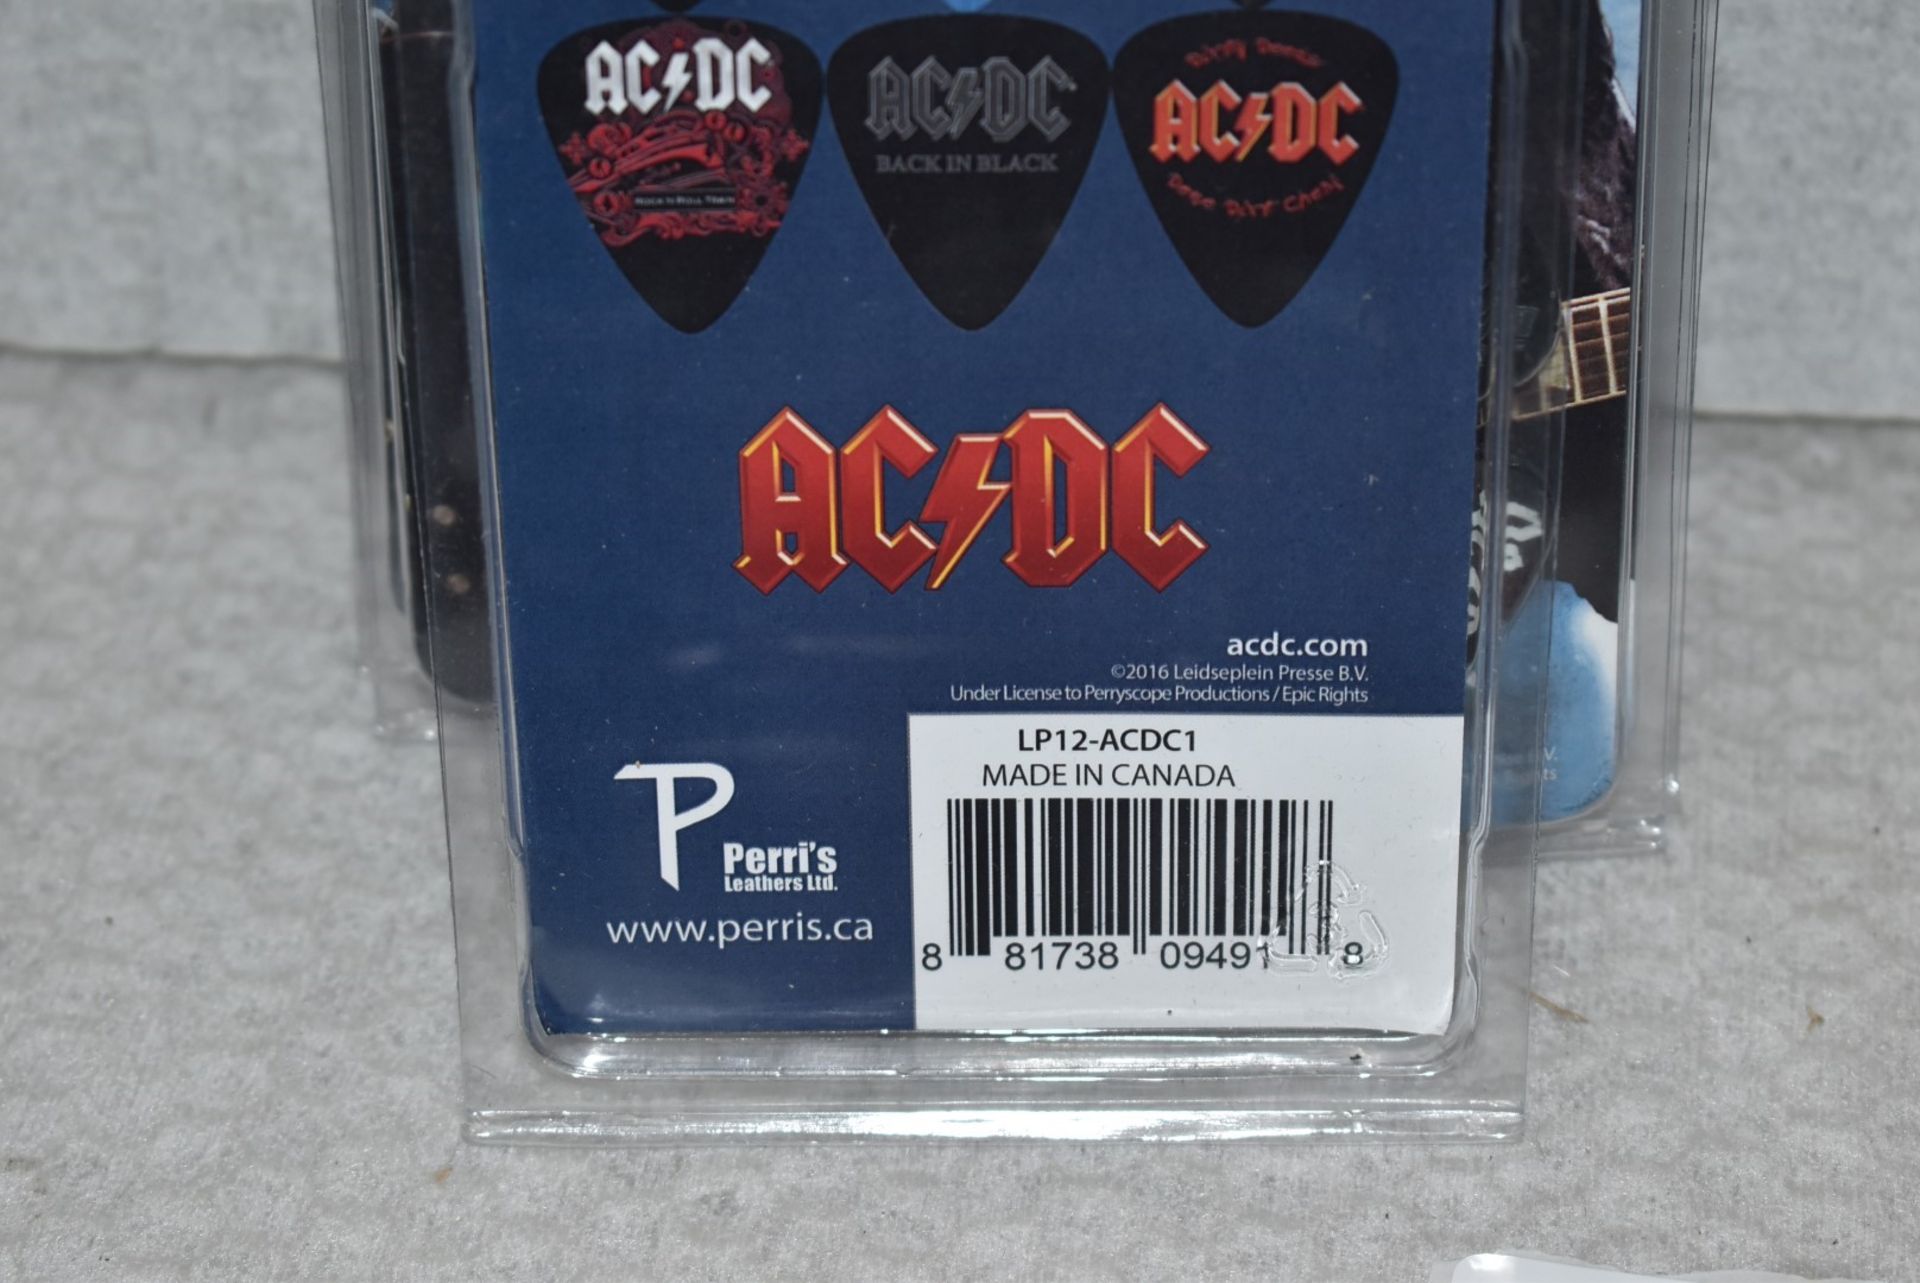 10 x ACDC Guitar Pick Multipacks By Perri's - 6 Picks Per Pack - Officially Licensed Merchandise - - Image 3 of 8